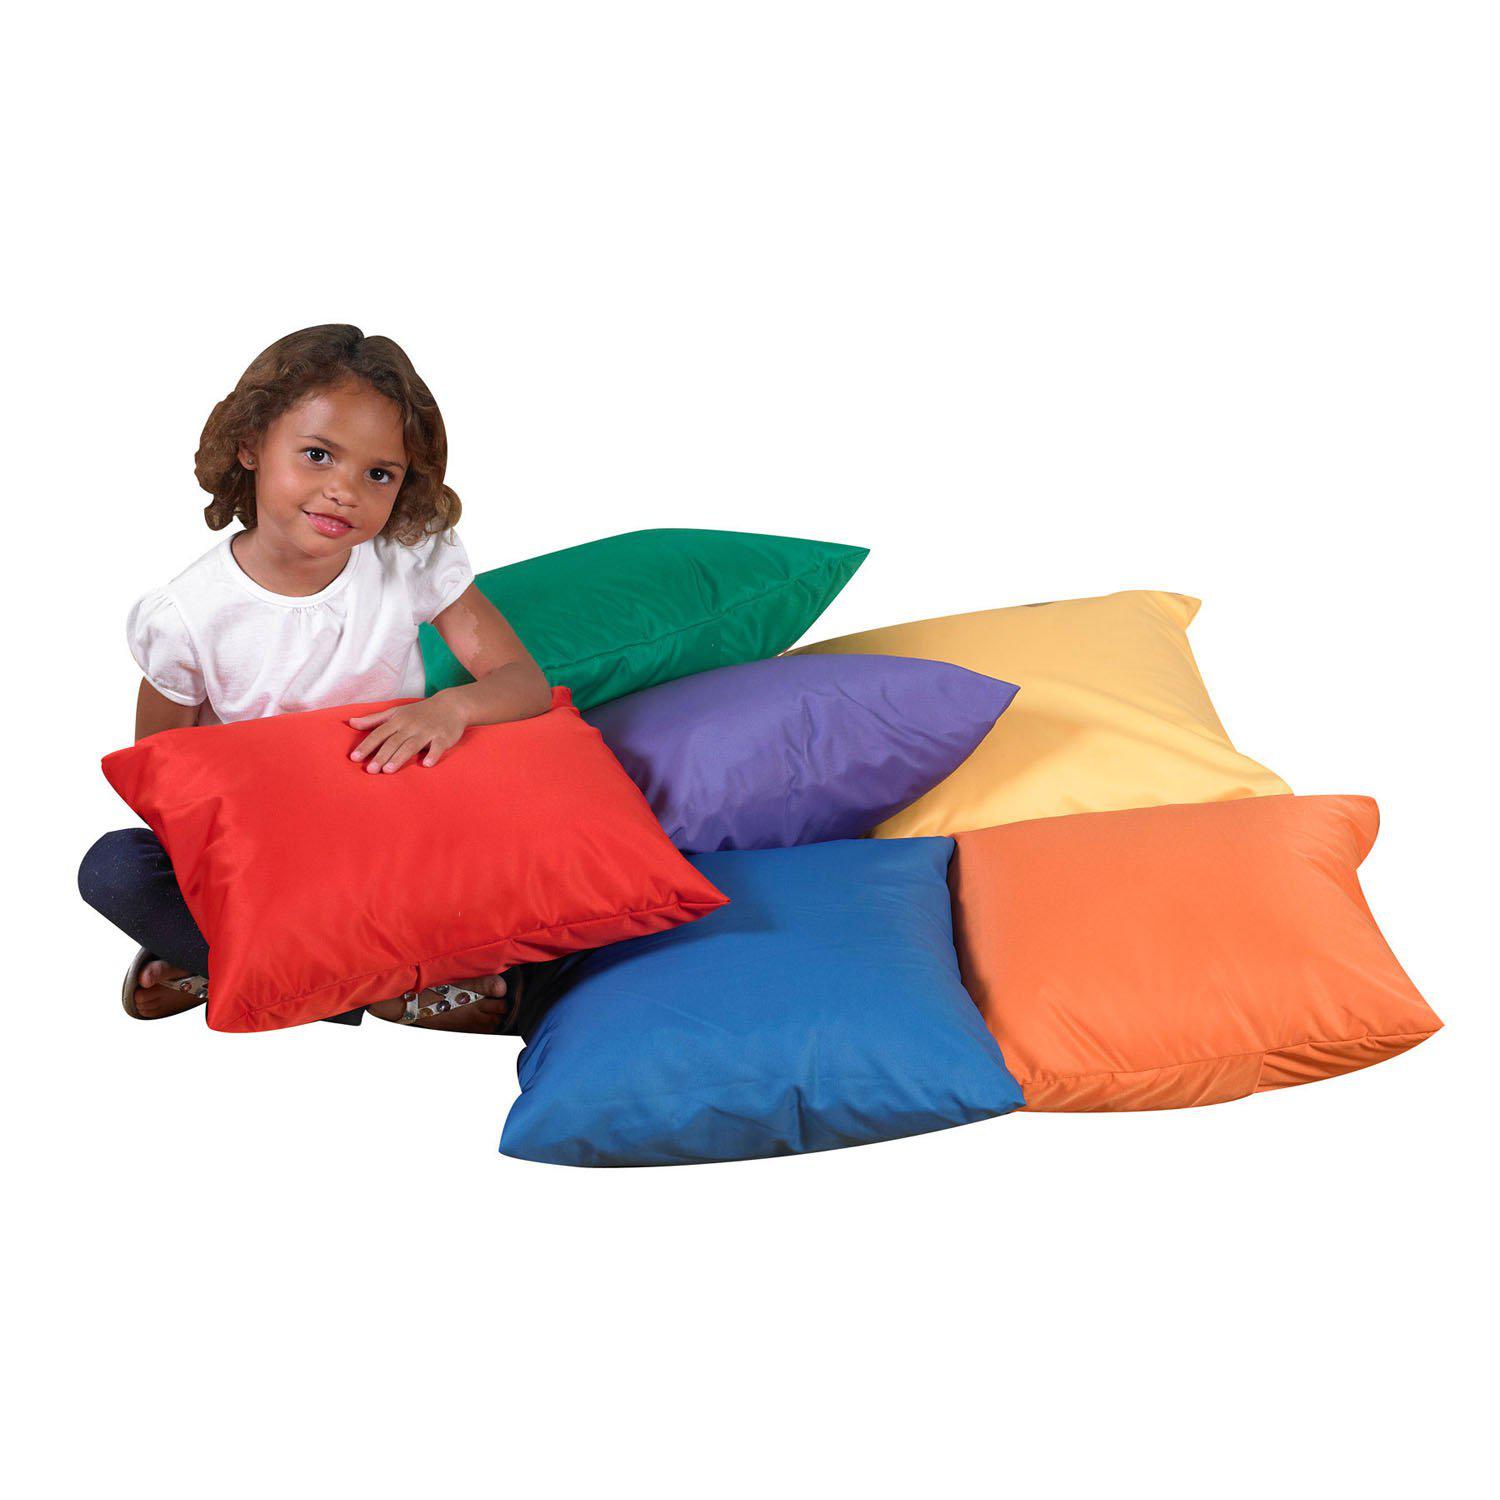 17" Cozy Pillows - Primary Colors - Set of 6